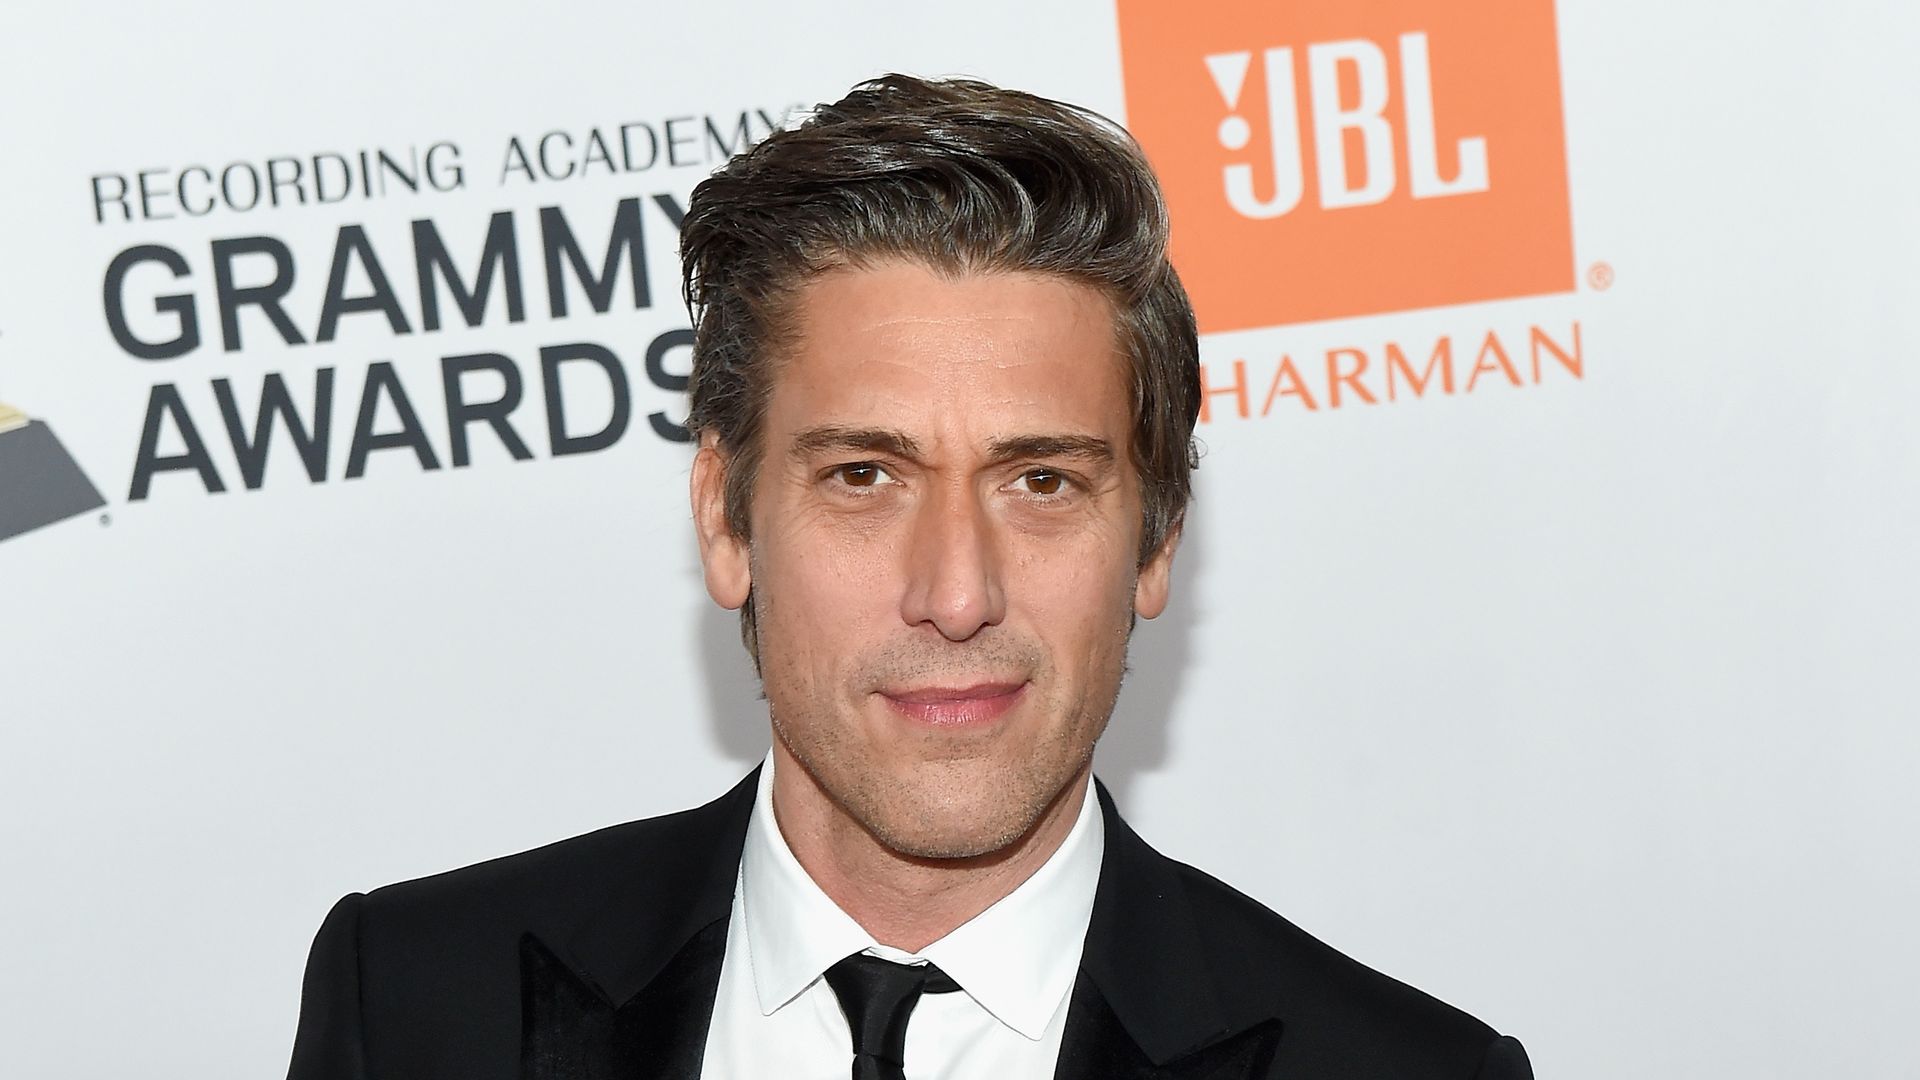 TV personality David Muir attends the Clive Davis and Recording Academy Pre-GRAMMY Gala and GRAMMY Salute to Industry Icons Honoring Jay-Z on January 27, 2018 in New York City